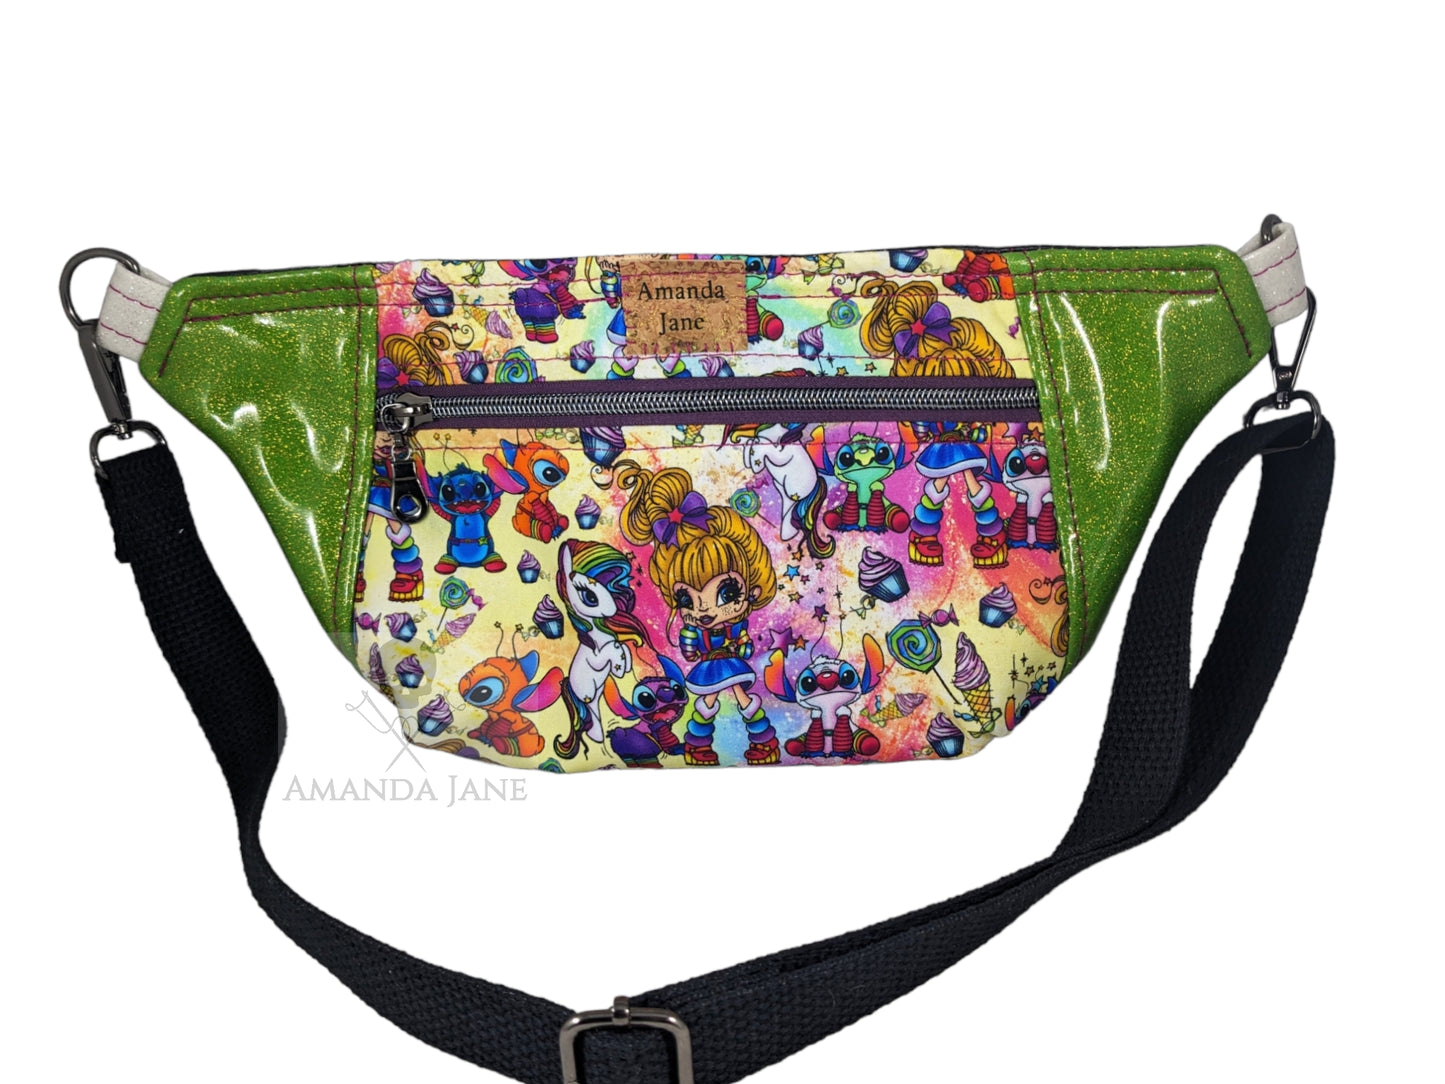 Handcrafted fanny pack bum bag sling rainbow girl